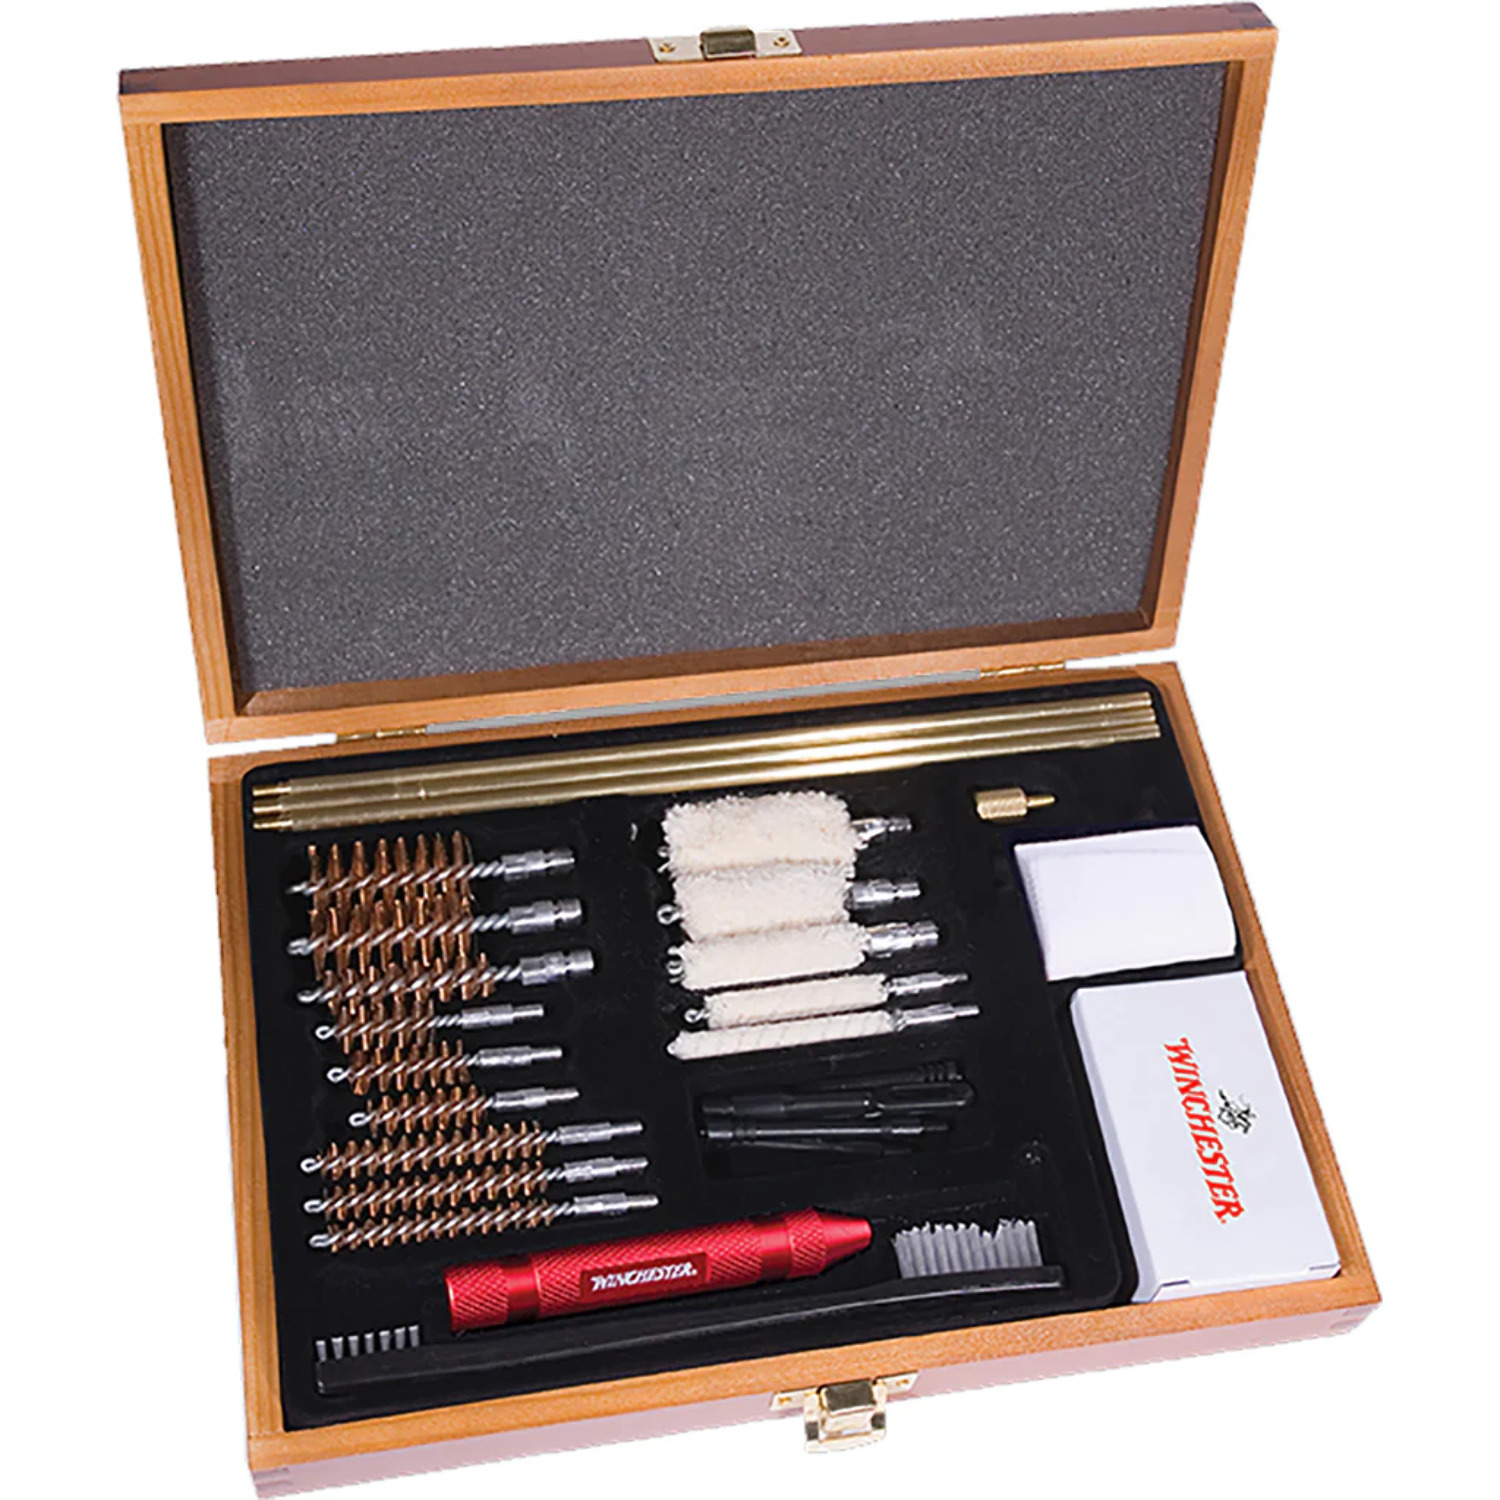 Winchester 30 Piece Universal Gun Cleaning Kit - image 1 of 2